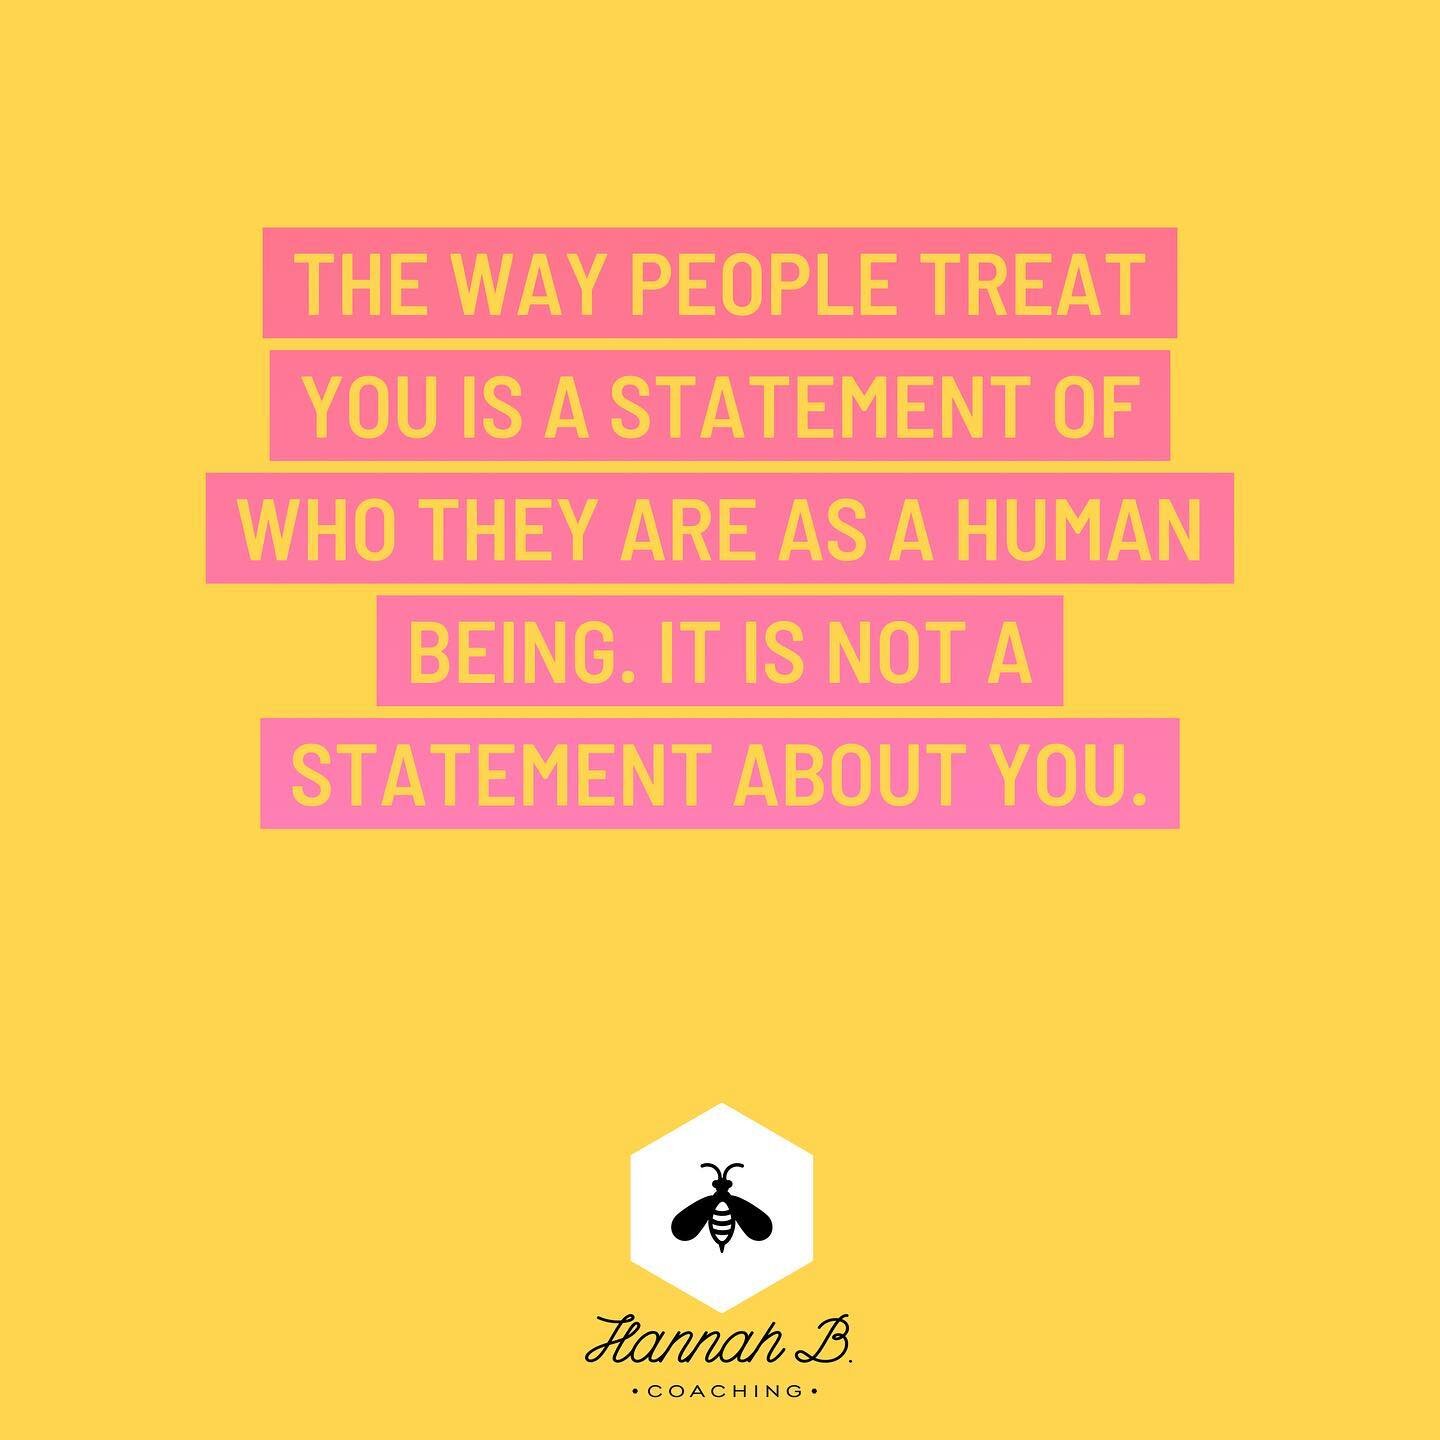 How other people treat you is THEIR path. How you respond to them is YOURS. ✌🏻 #transitiontuesday #marthabecklifecoach #choosejoy #changeyourthoughtschangeyourlife #letitgo #itsokaytohurt #lifecoach2women #walkingaway #lifechanges #lifecoach #lifeco